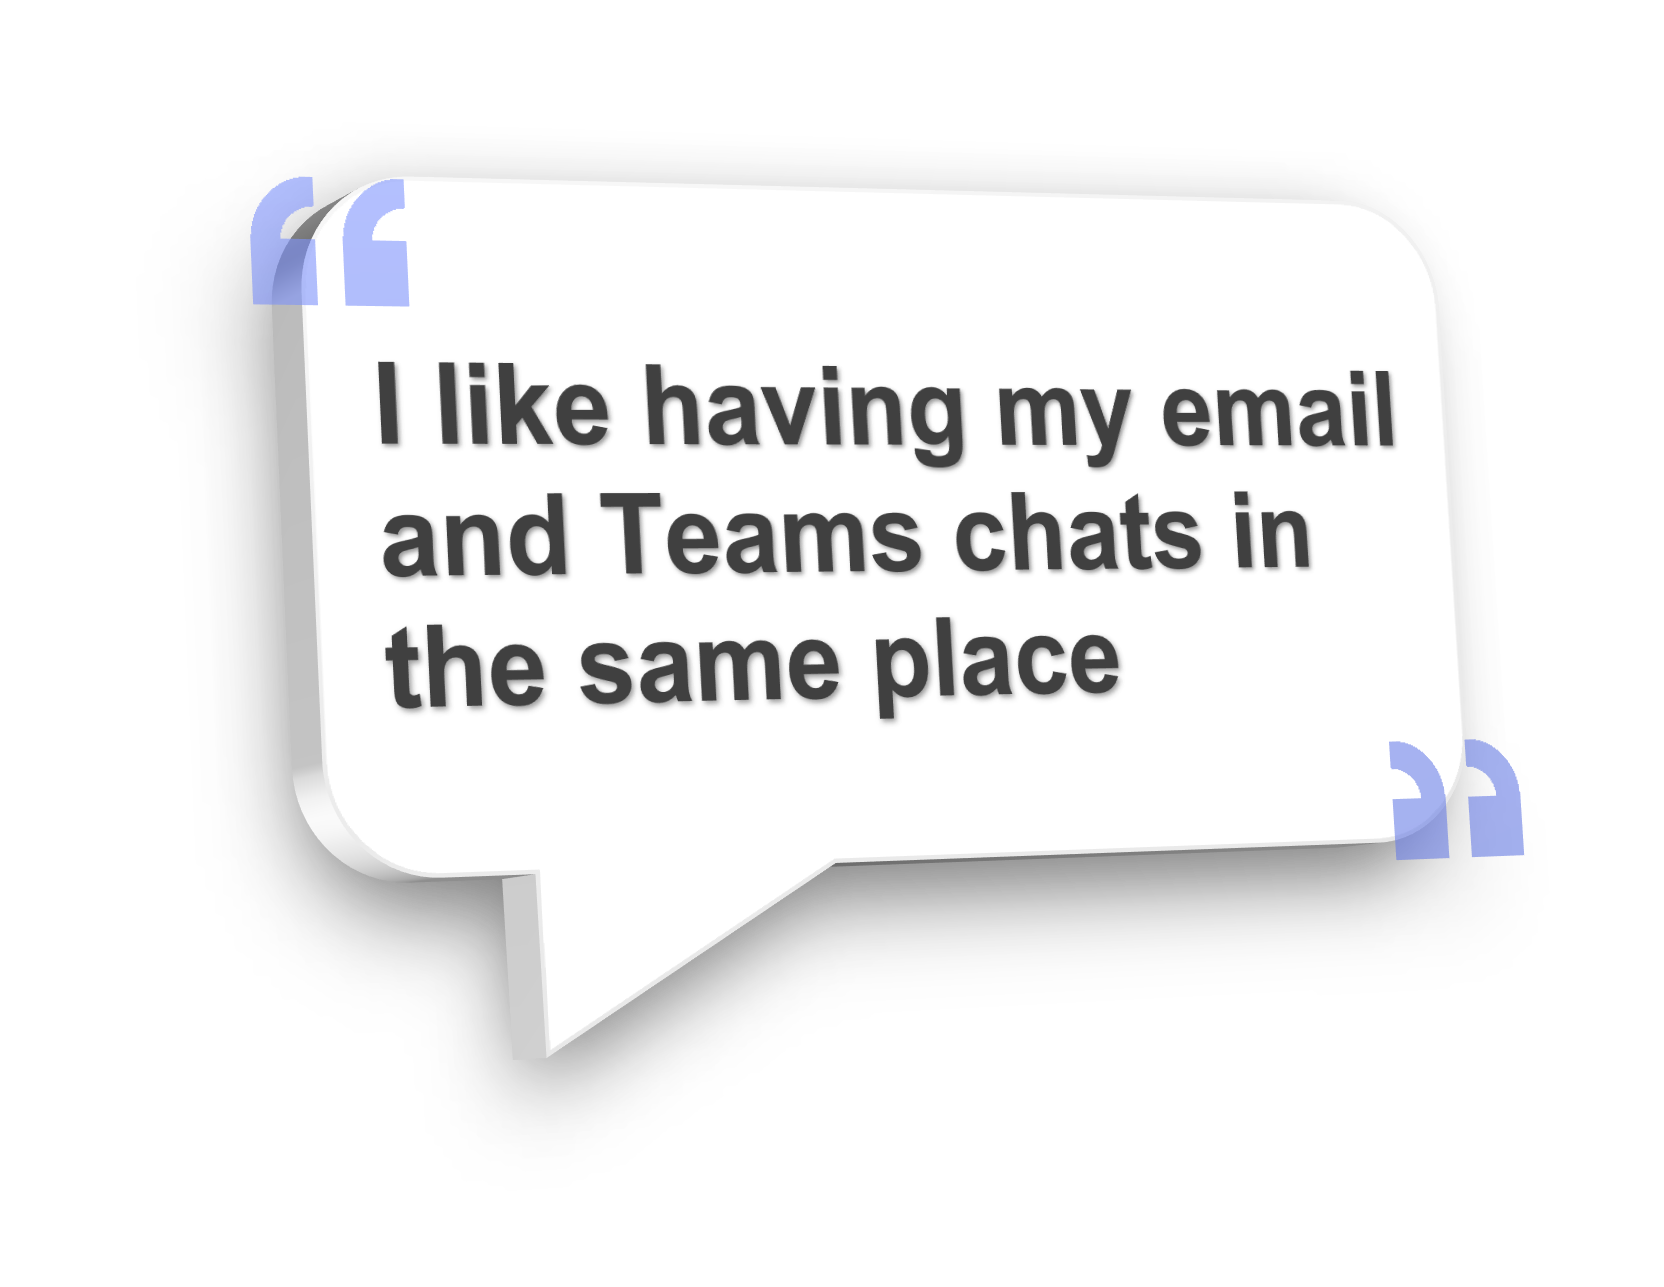 User testimonial 2 quotation bubble: 'I like having my email and Teams chats in the same place'